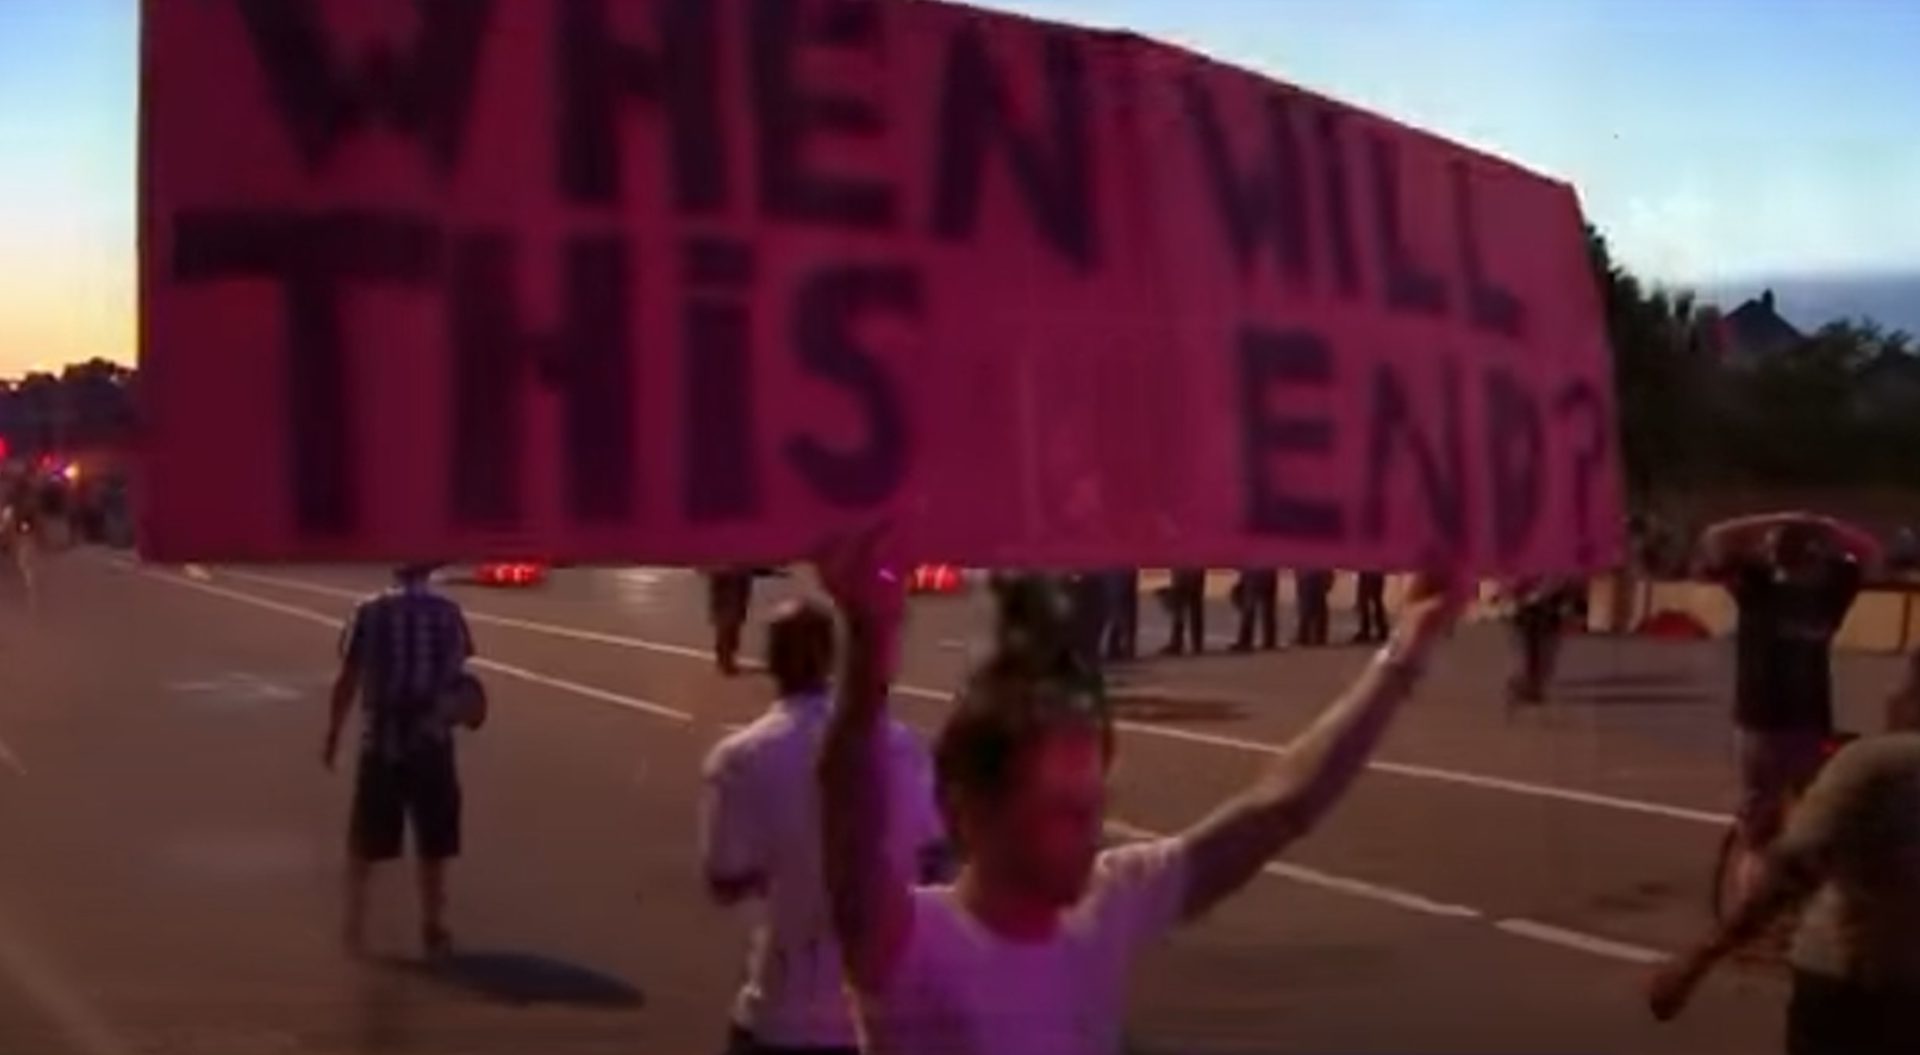 The music video uses footage from Black Lives Matter protests